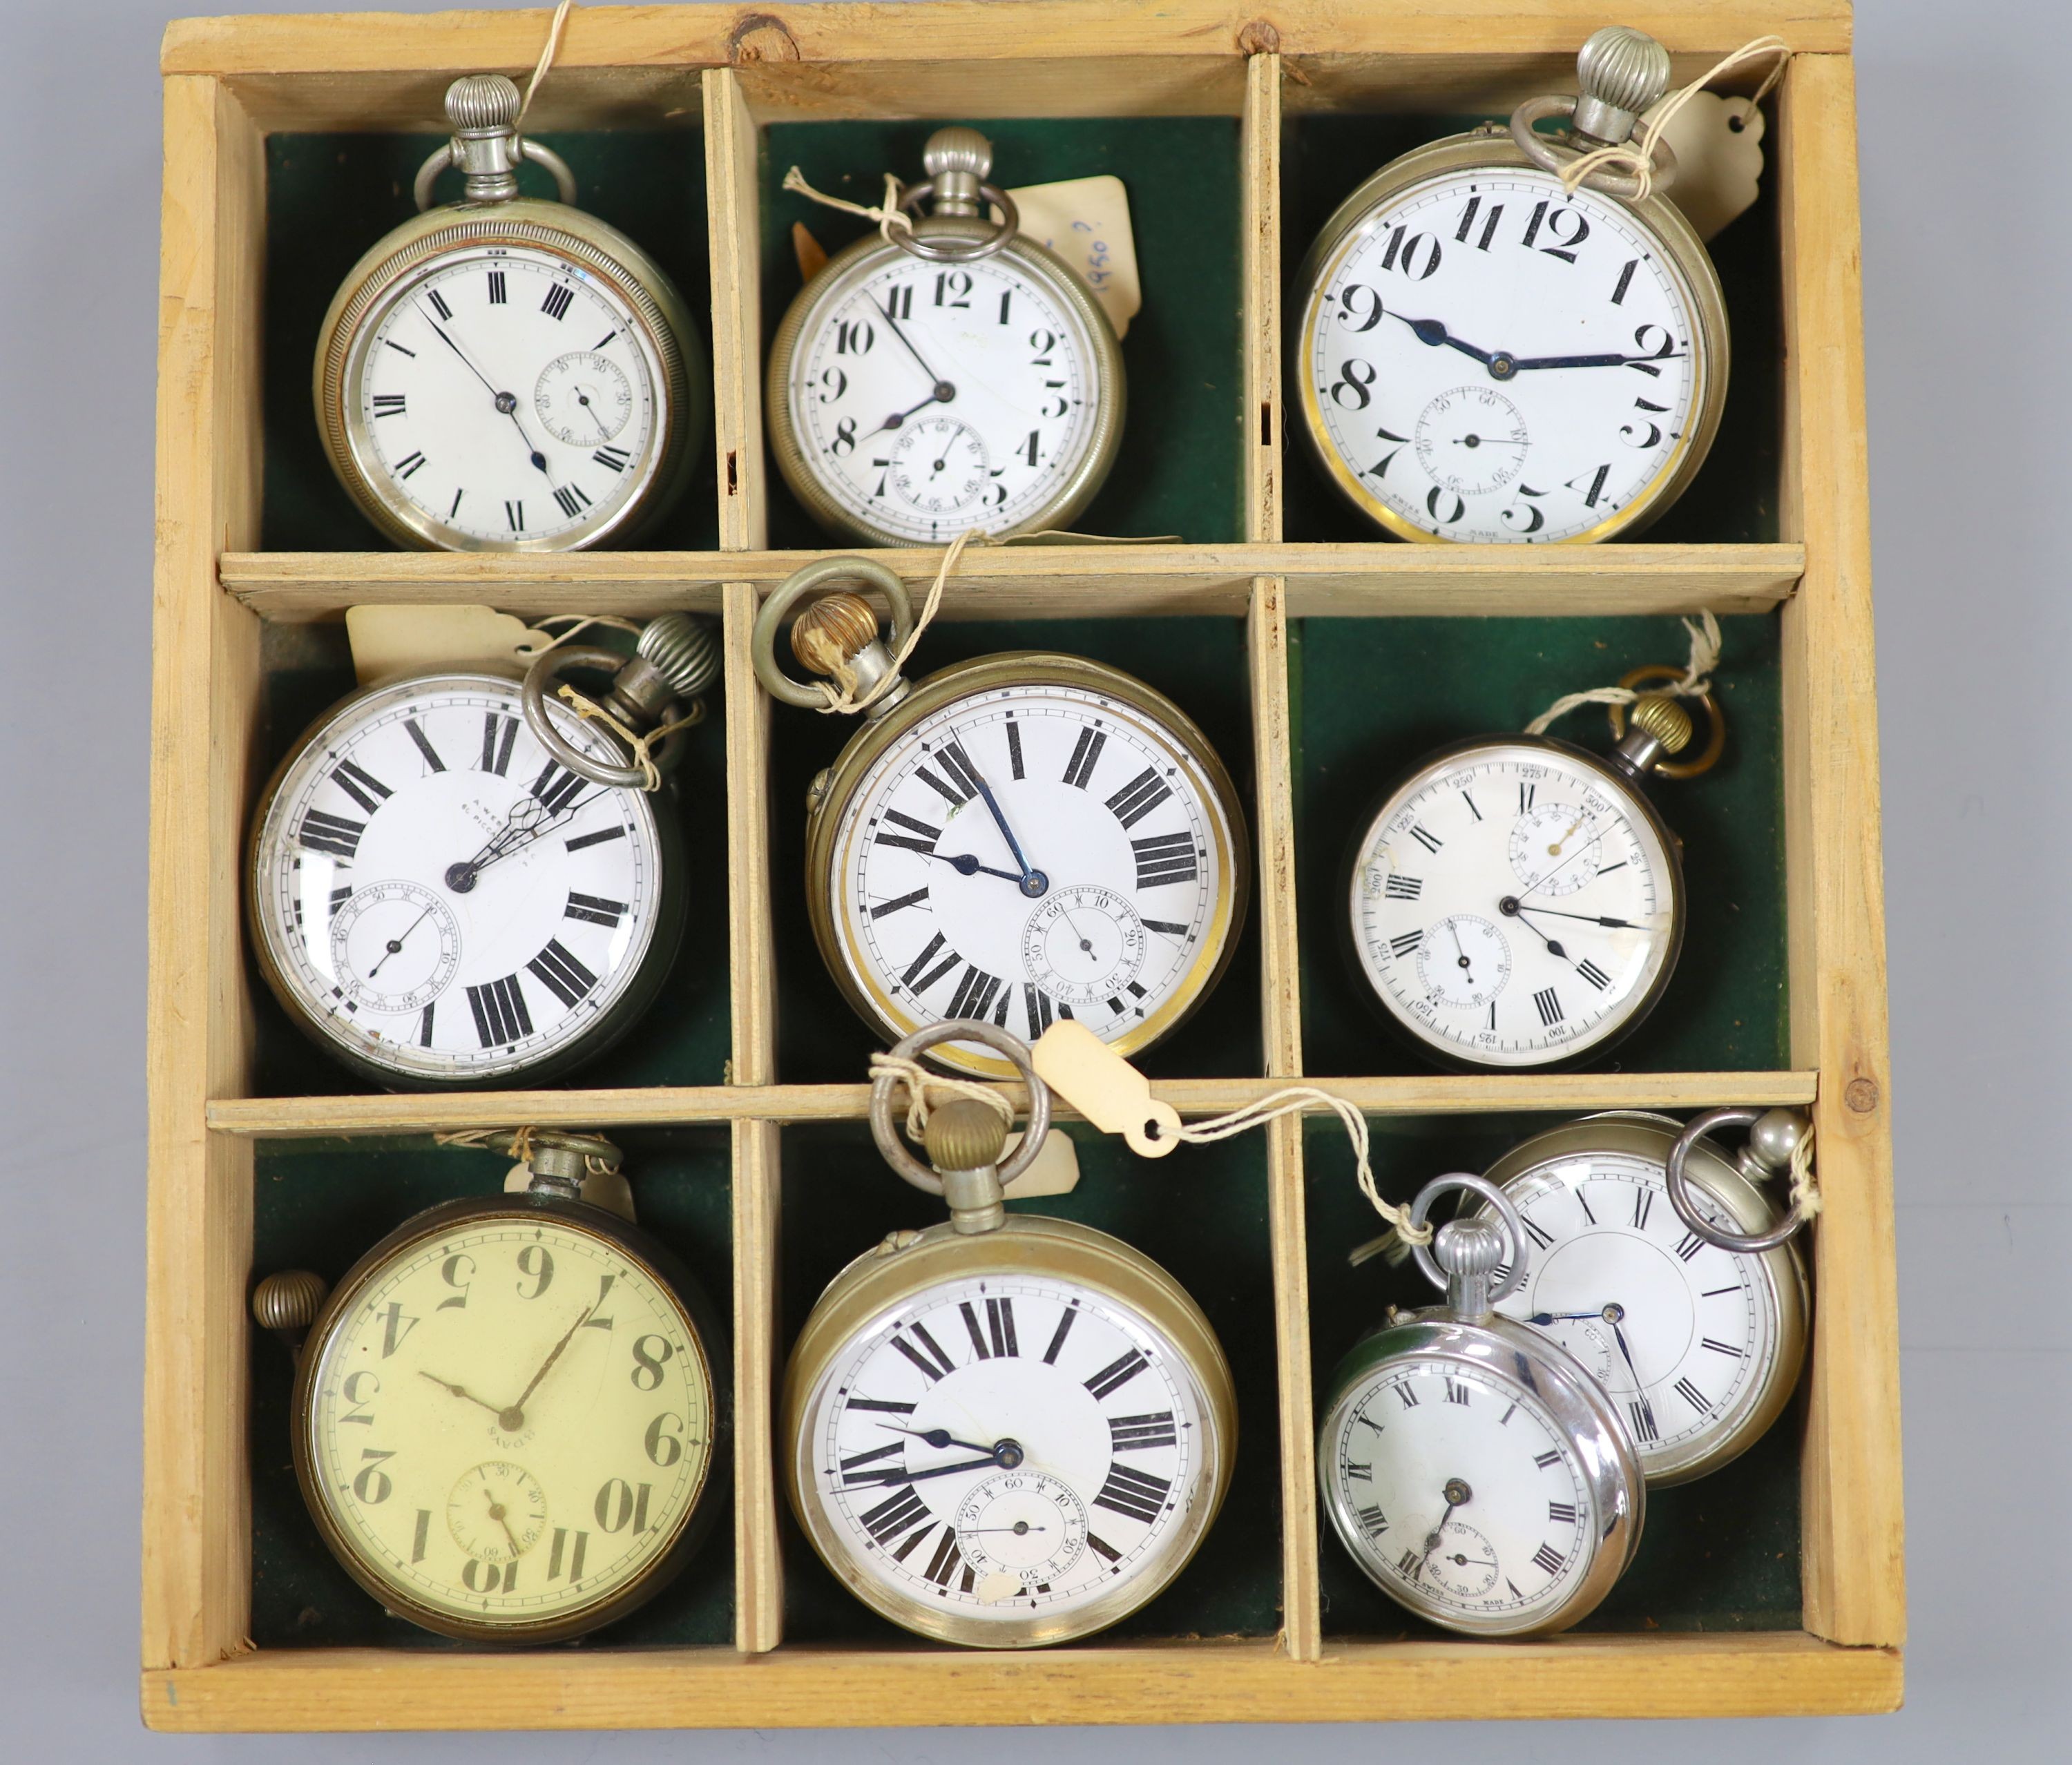 Ten assorted Victorian and later plated and base metal keywind and keyless pocket watches.